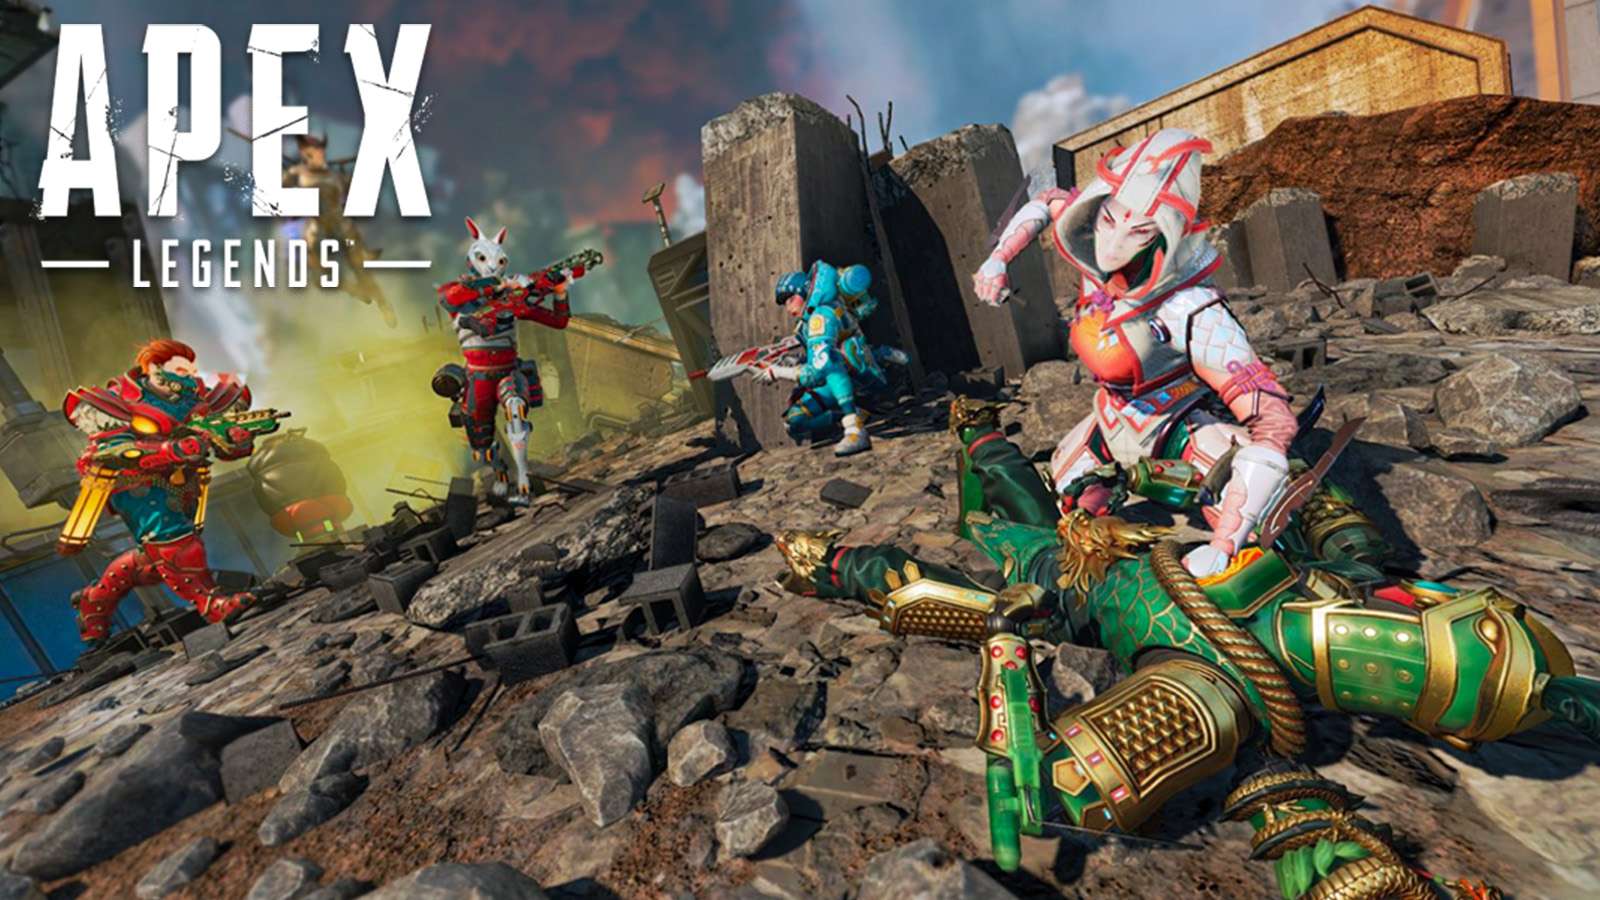 Apex Legends characters in action